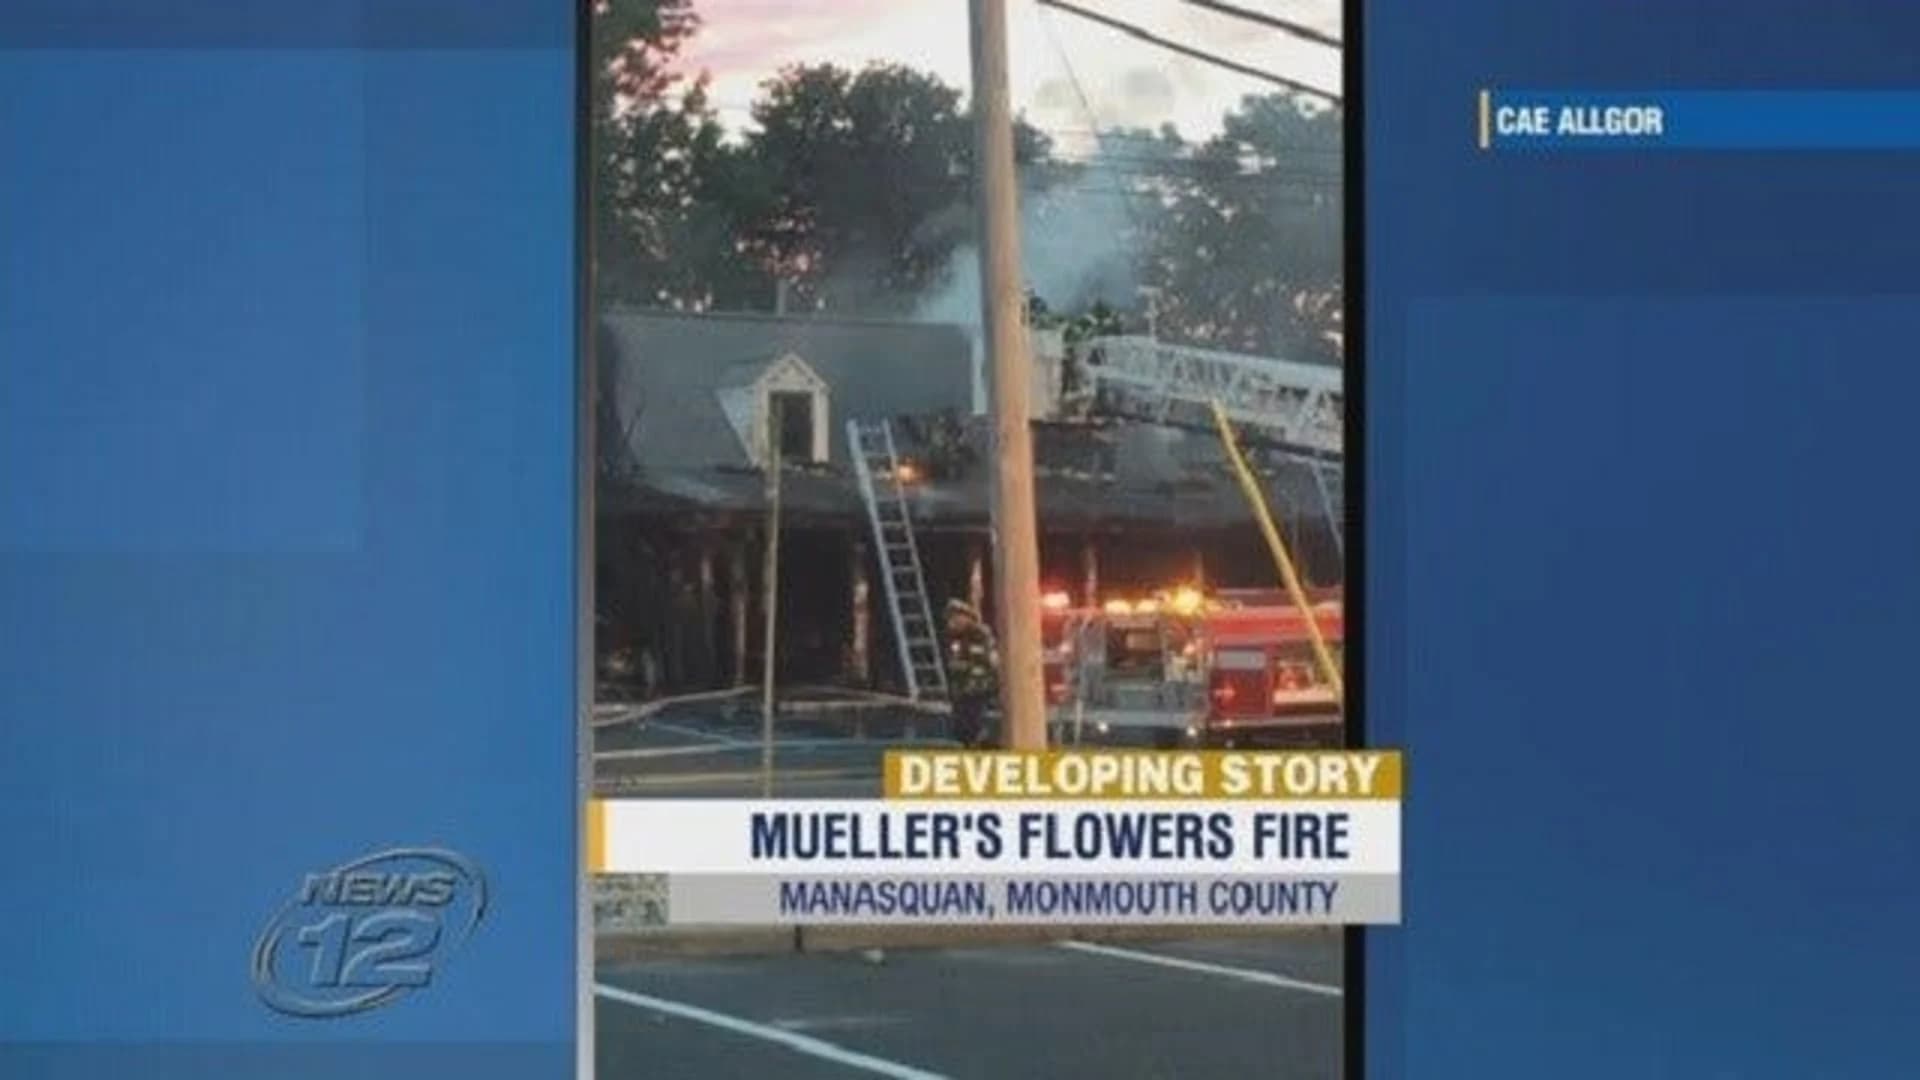 Fire destroys nearly 90-year-old business in Monmouth County